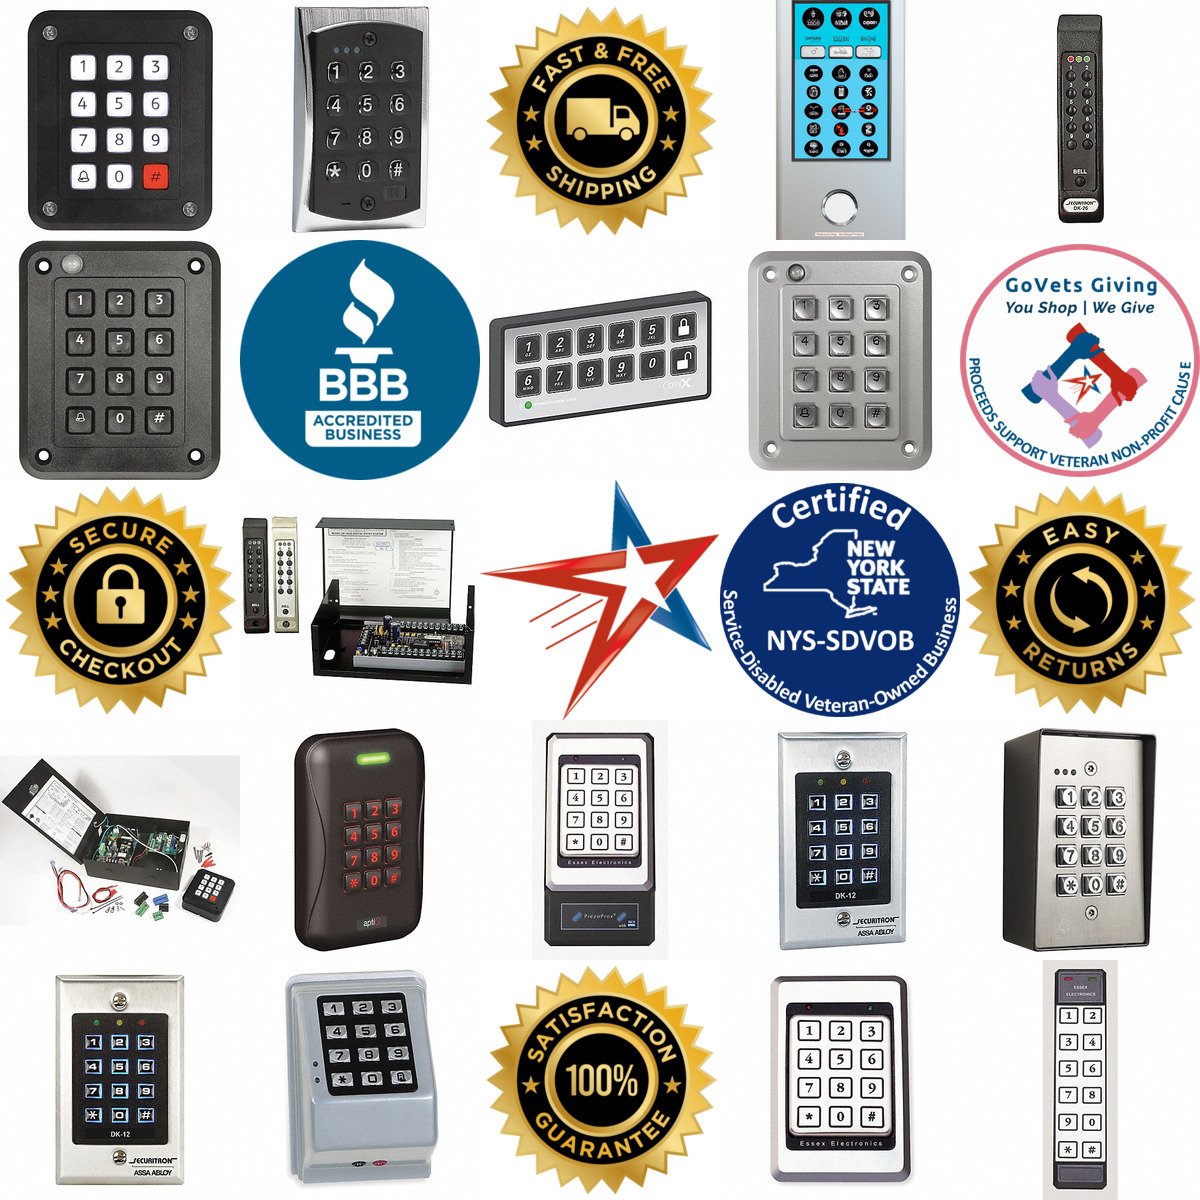 A selection of Keyless Access Control Keypads products on GoVets